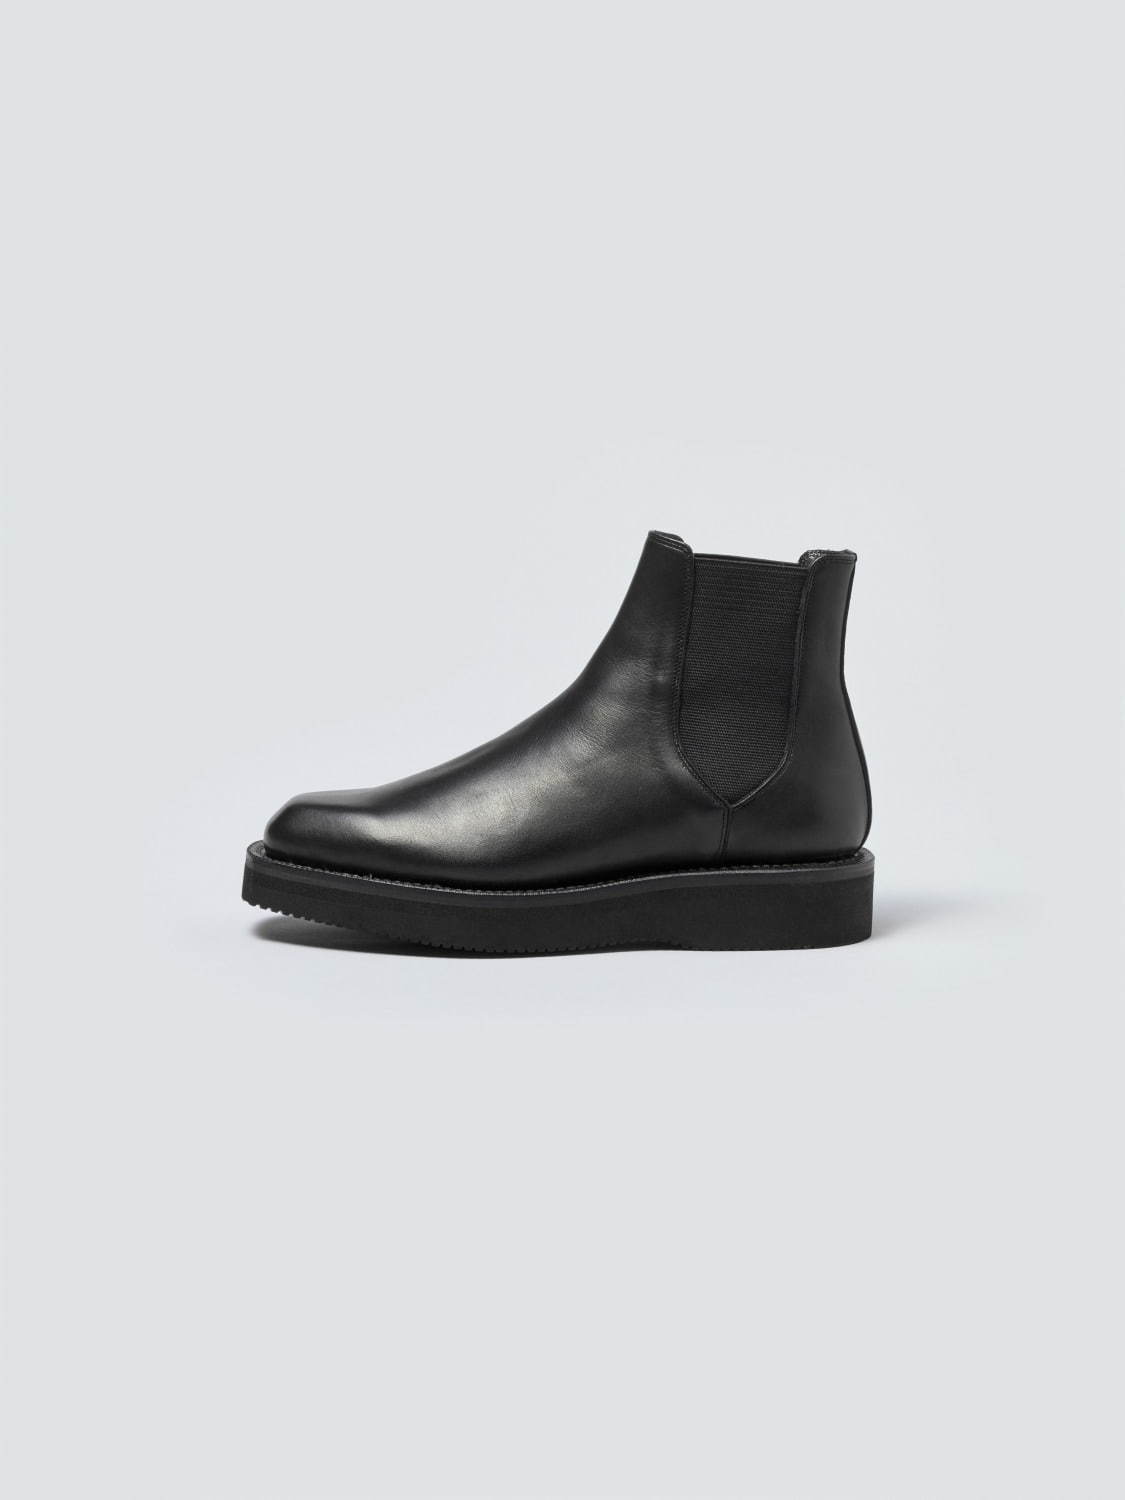 LEATHER SQUARE BOOTS MADE BY FOOT THE COACHER 79,000円＋税